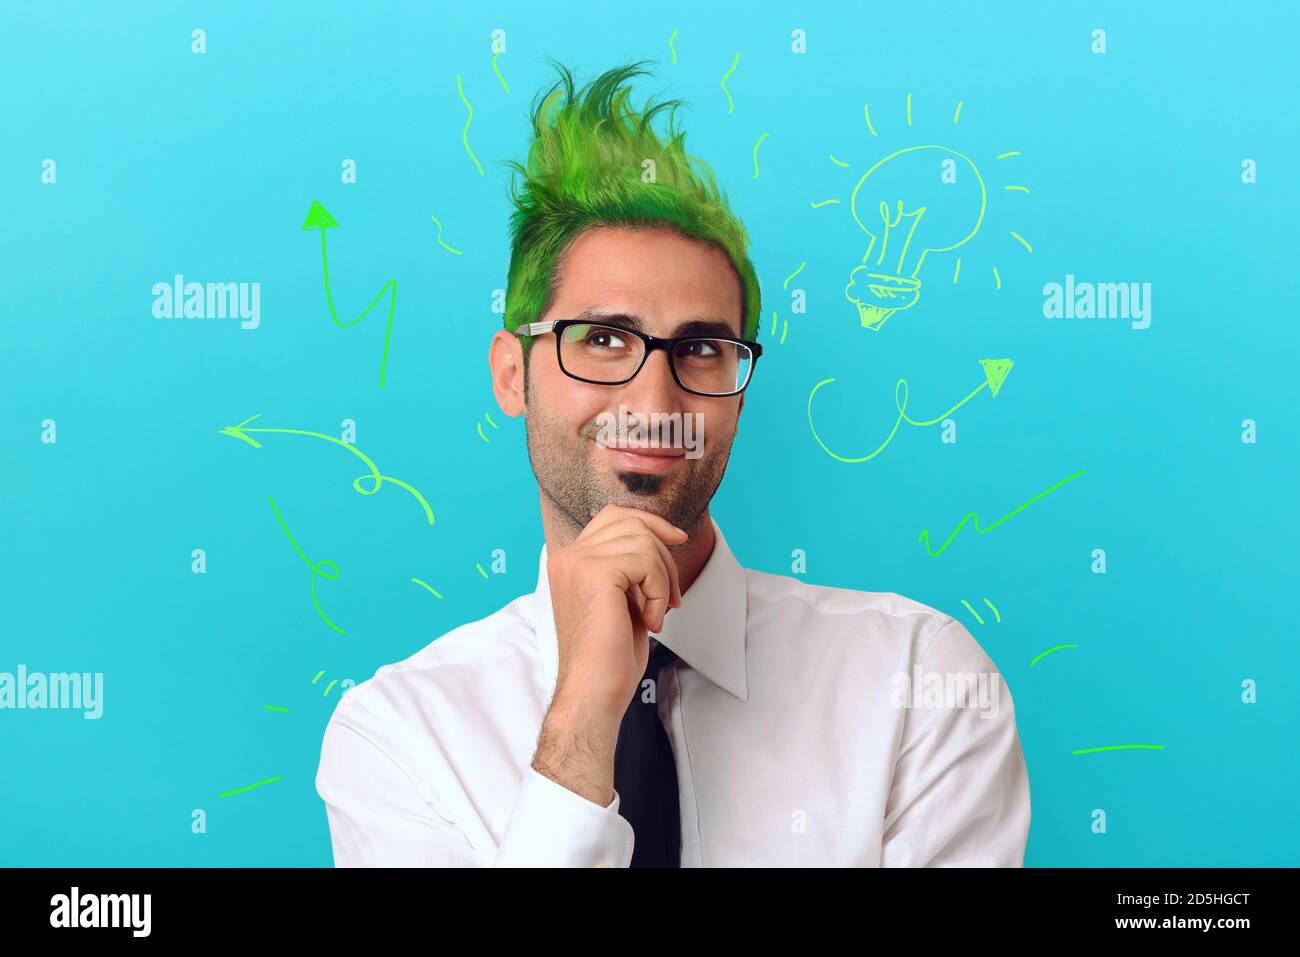 Creative businessman with green hair thinks about a crazy project Stock Photo